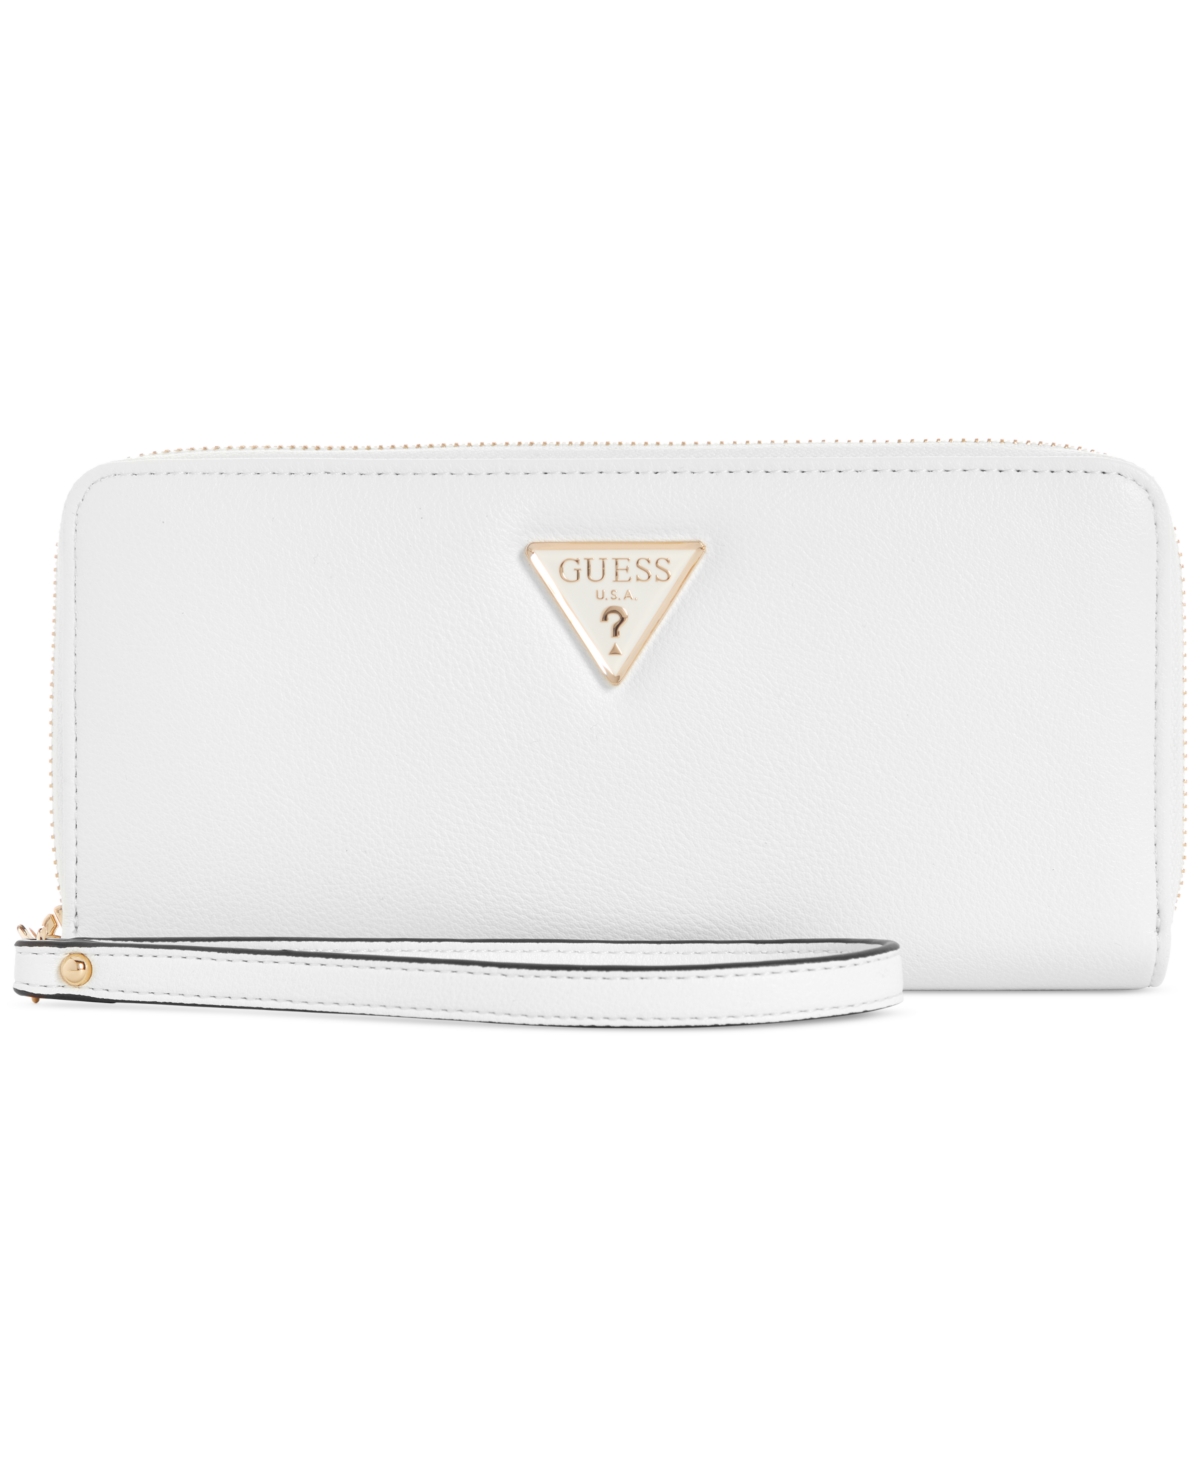 Guess Clai Slg Large Zip Around Wallet, Created For Macy's In White